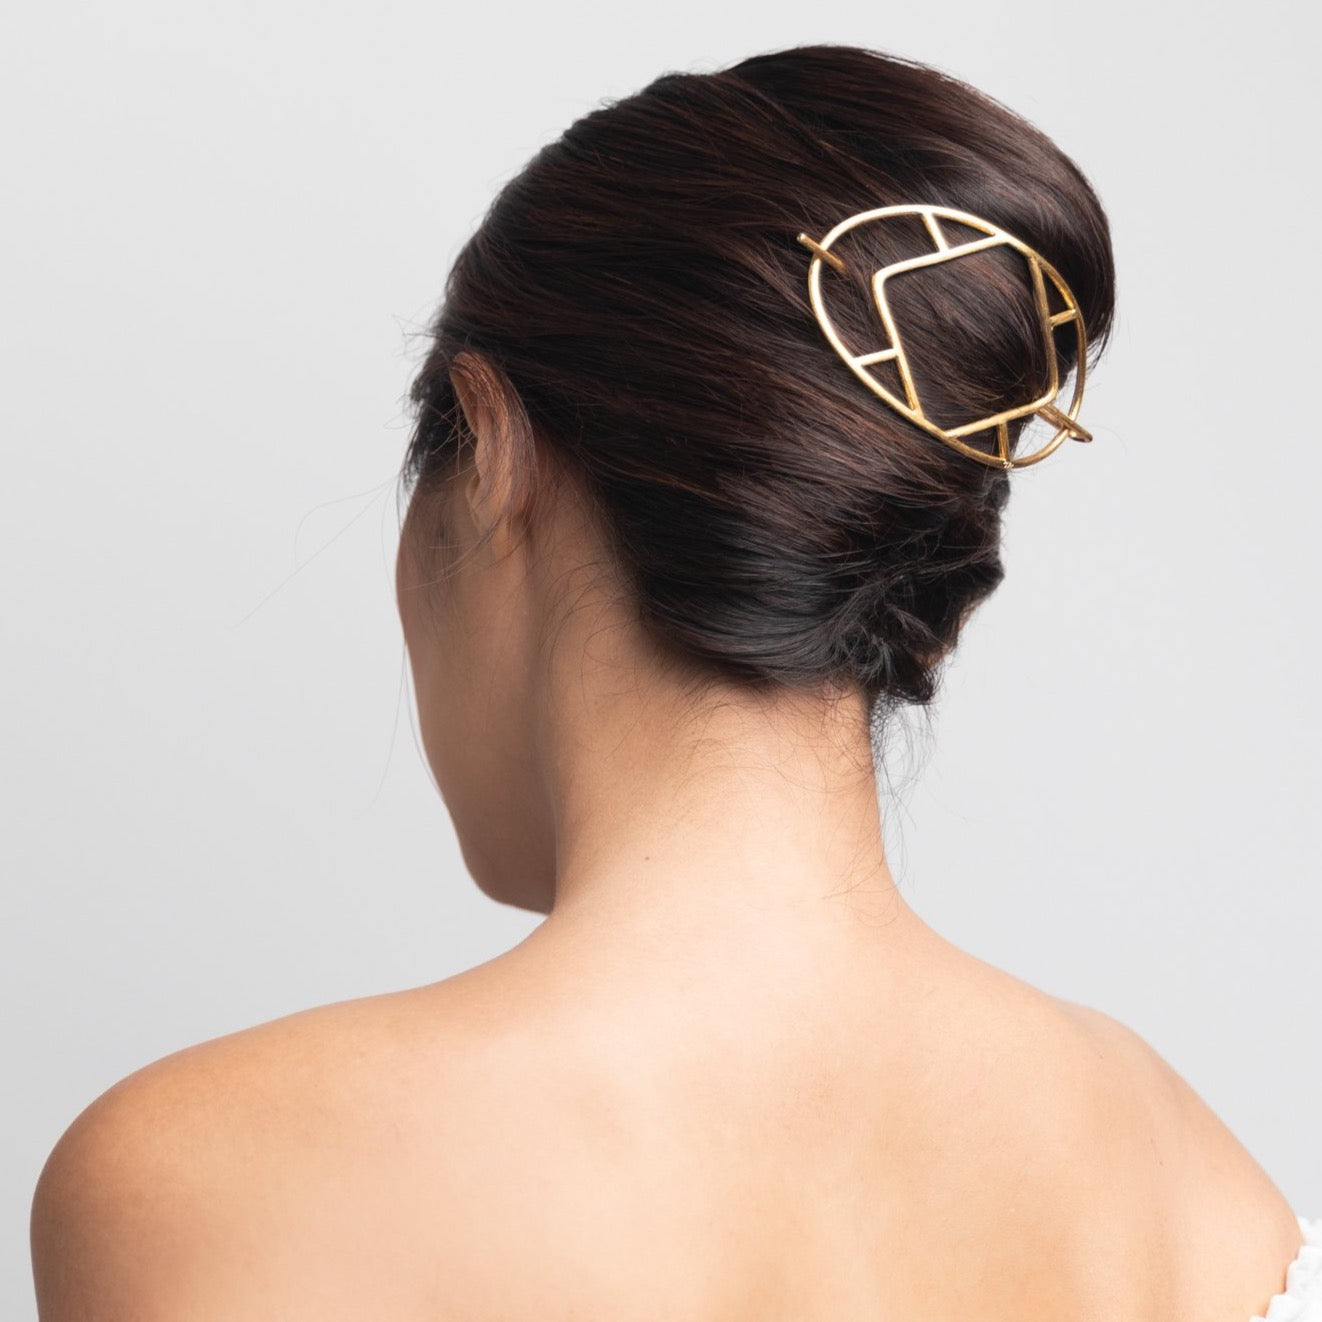 hairpin hairclip accessory barrette